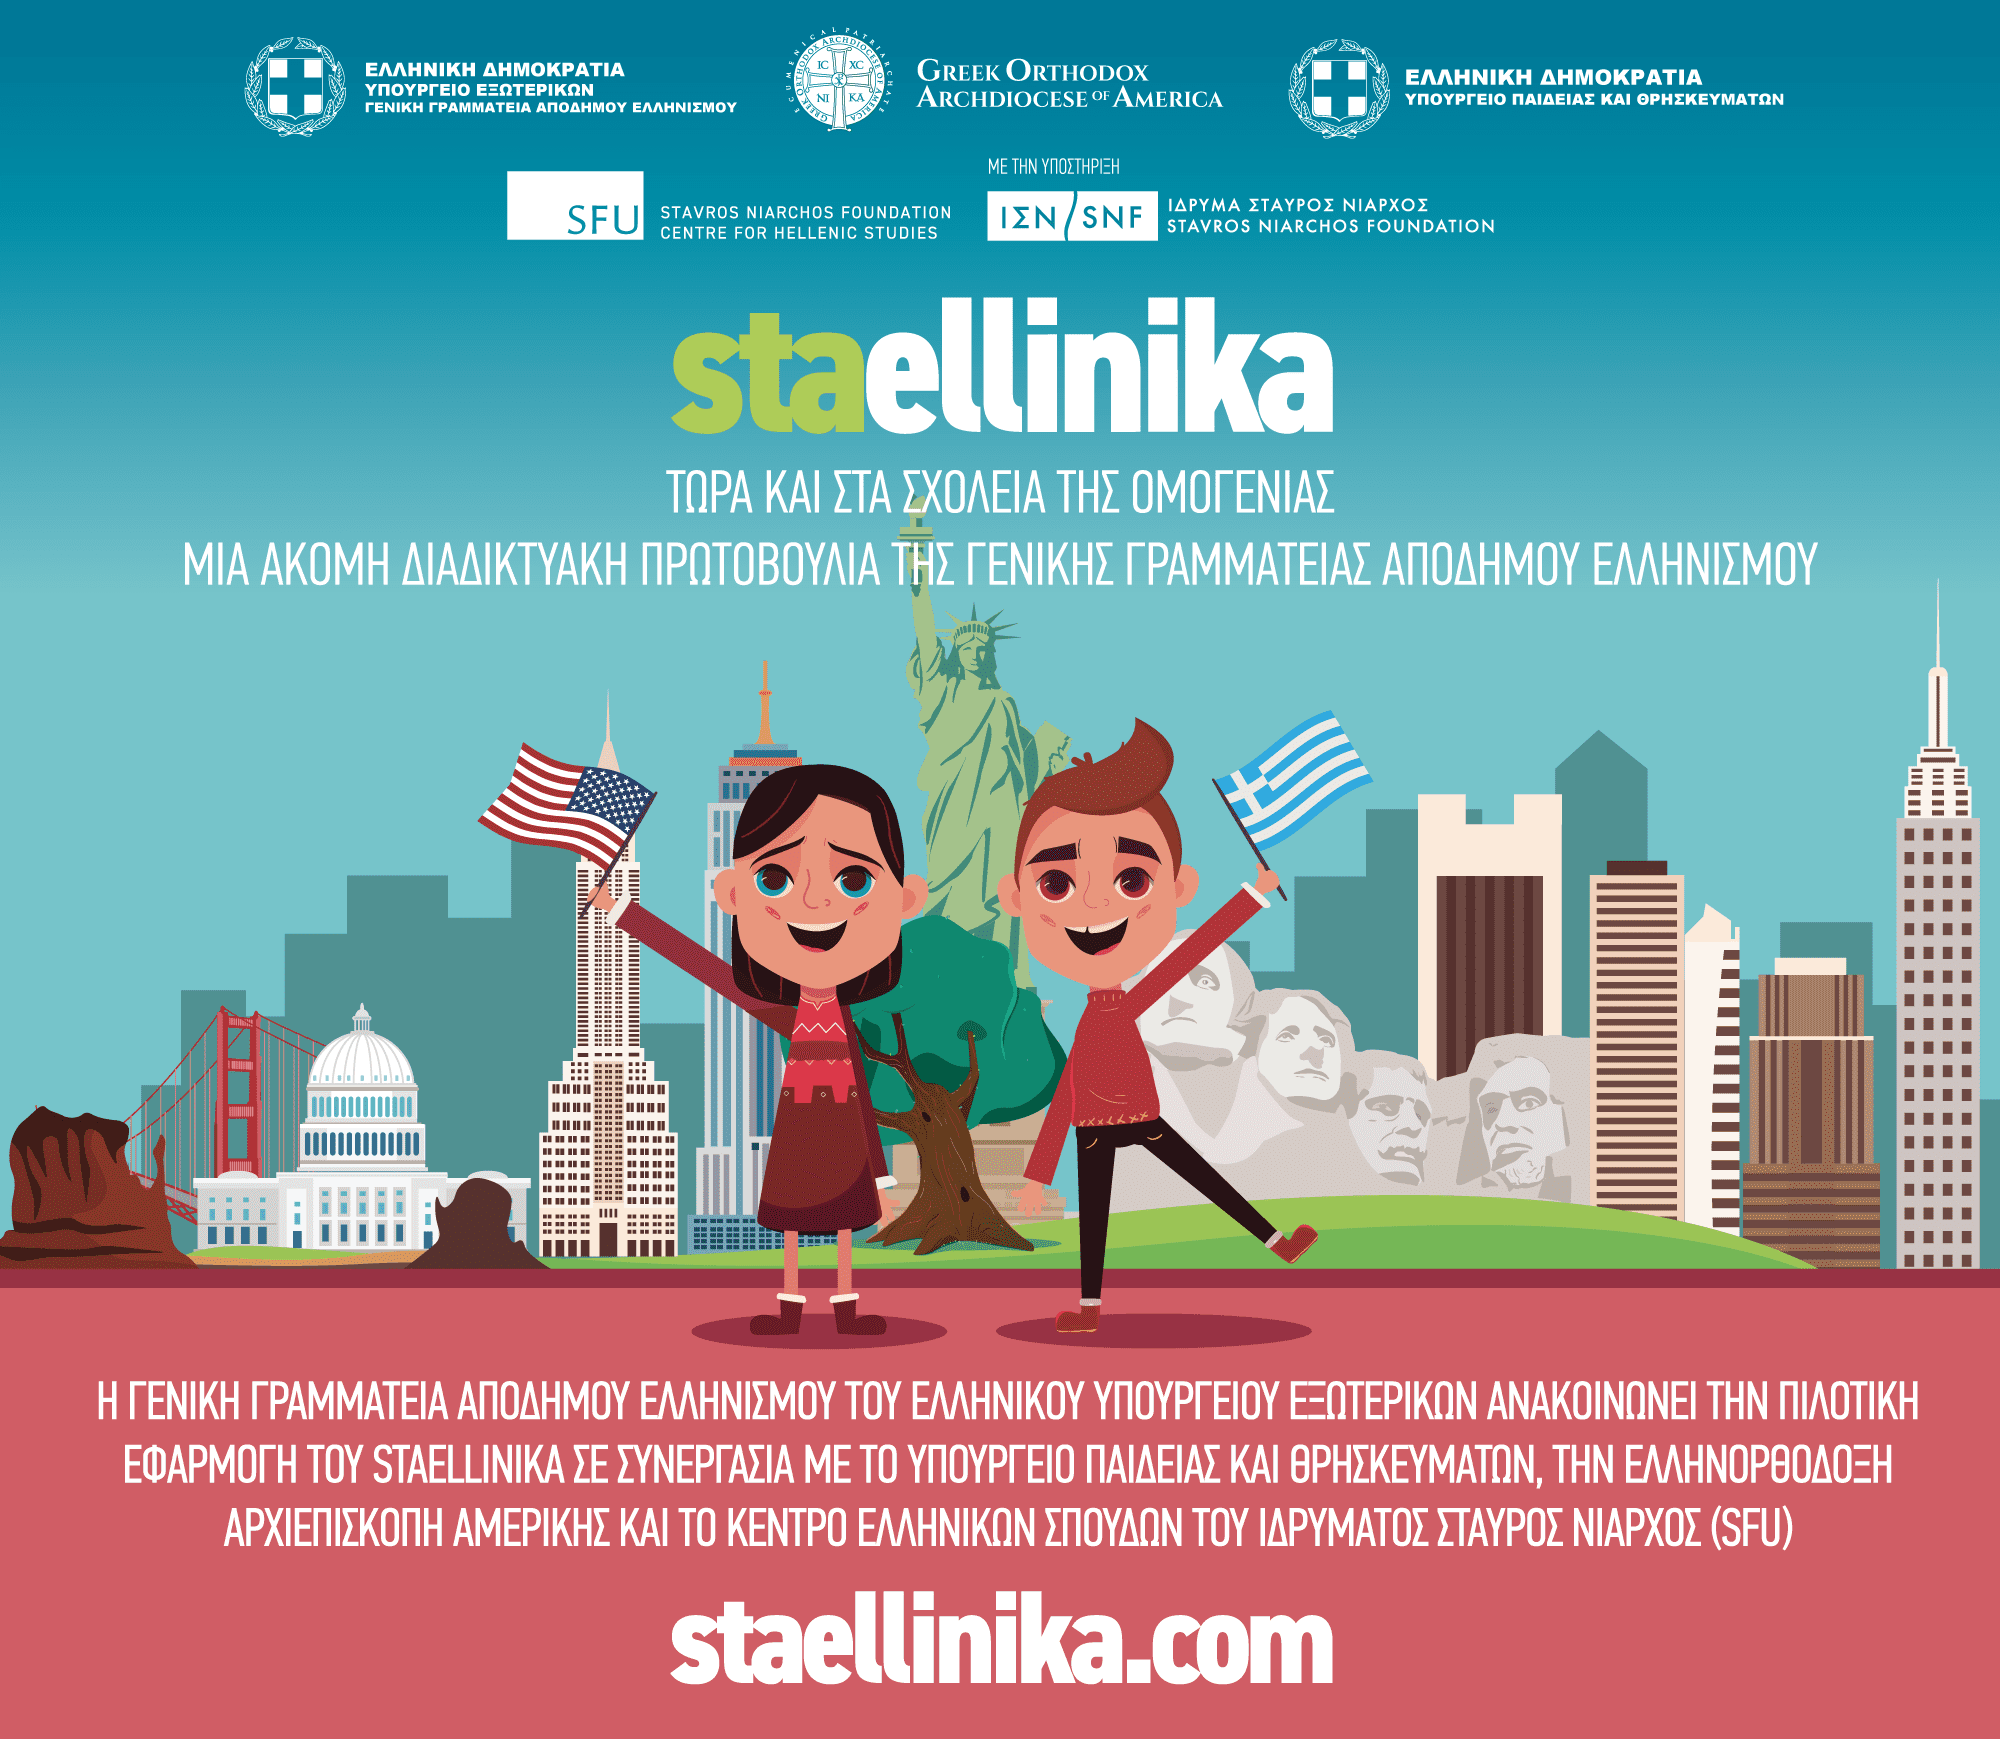 StaEllinika app supports young Greek children to remain connected to culture